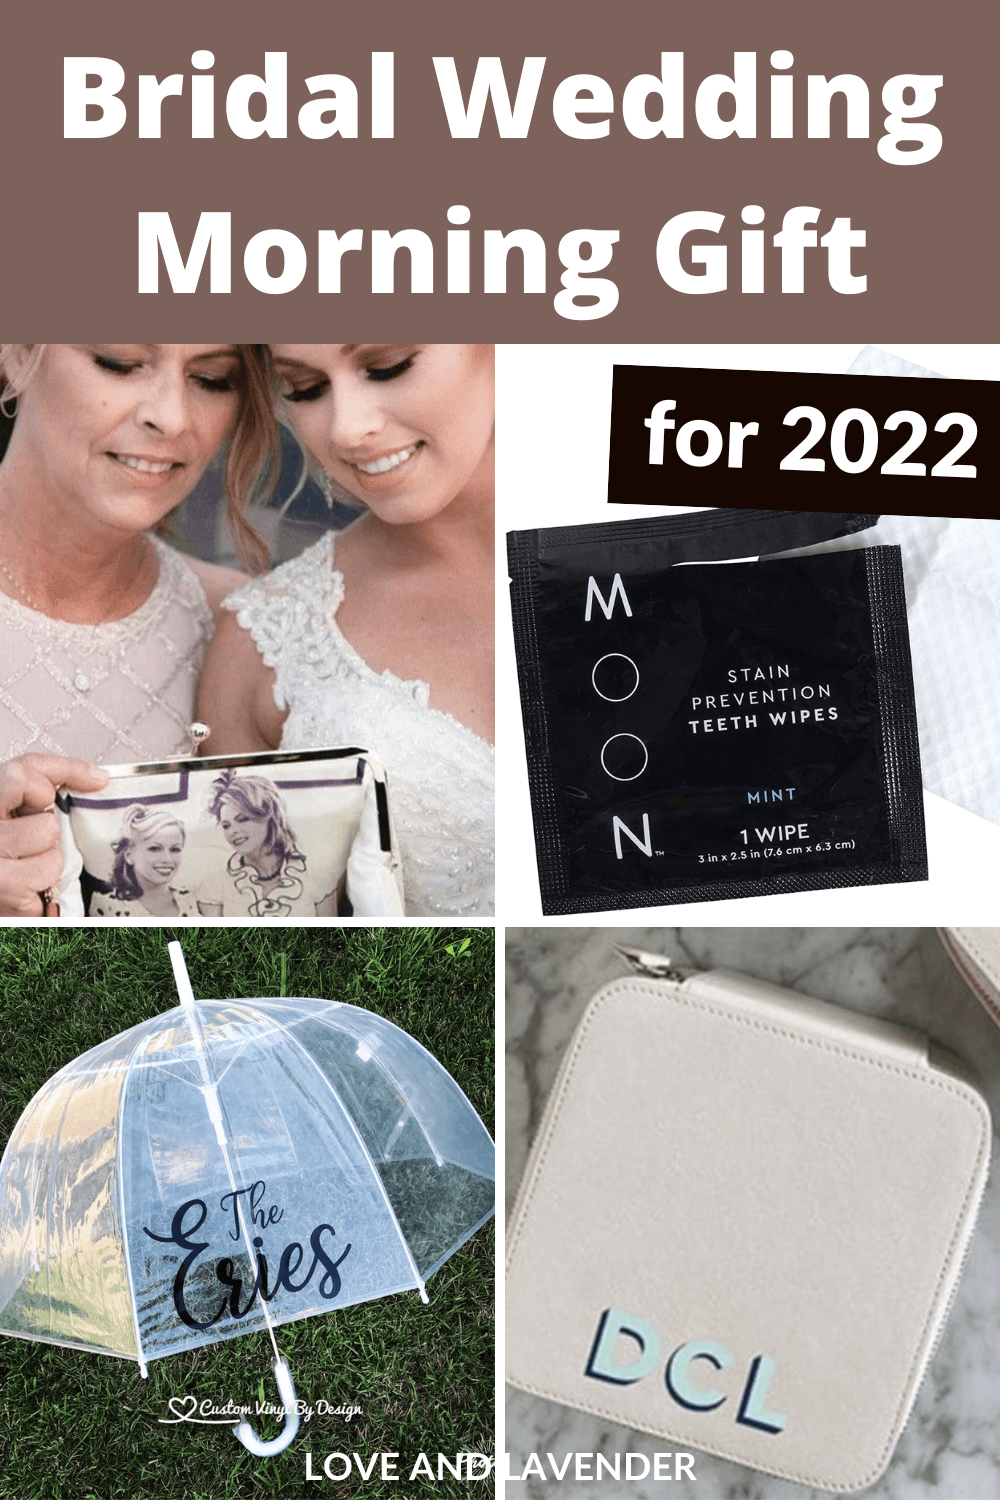 Day-of wedding morning gifts for the bride is a beautiful and classic piece that serves as excellent investment piece. Made from high-quality materials, this lovely piece will last you years and will never go out of style!